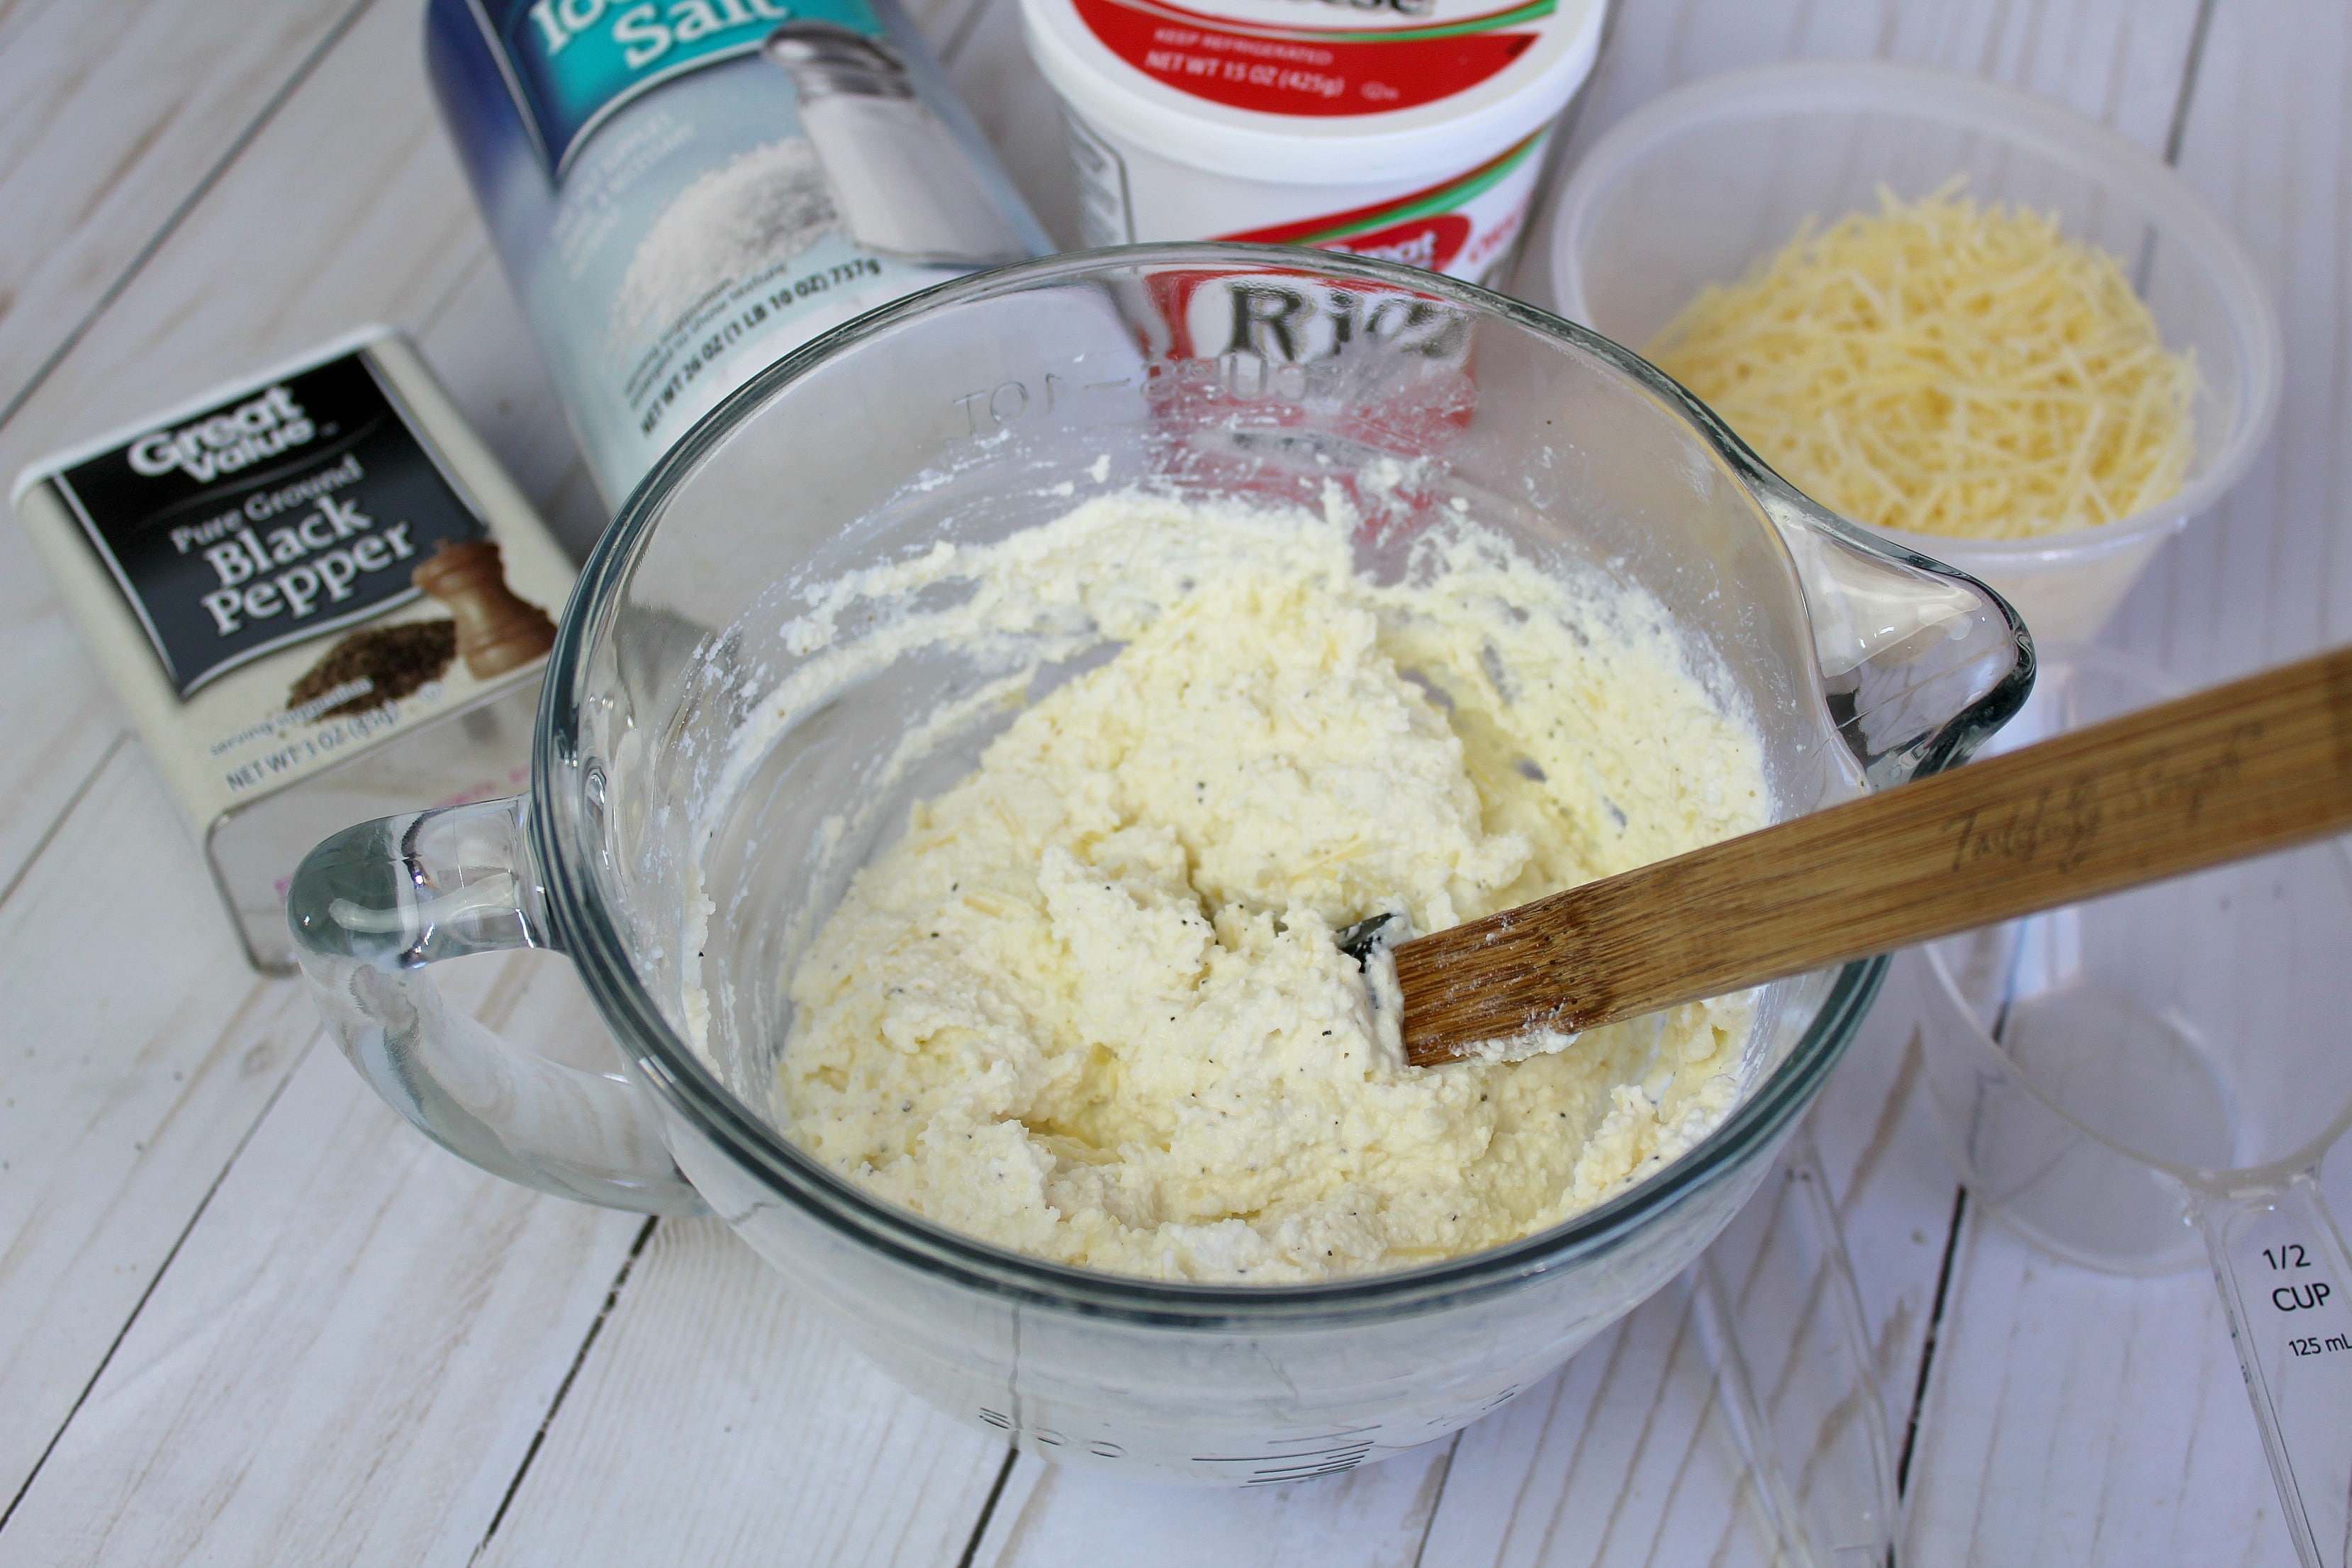 Mix the parmesan and ricotta cheese together in a bowl, then add salt and pepper. 